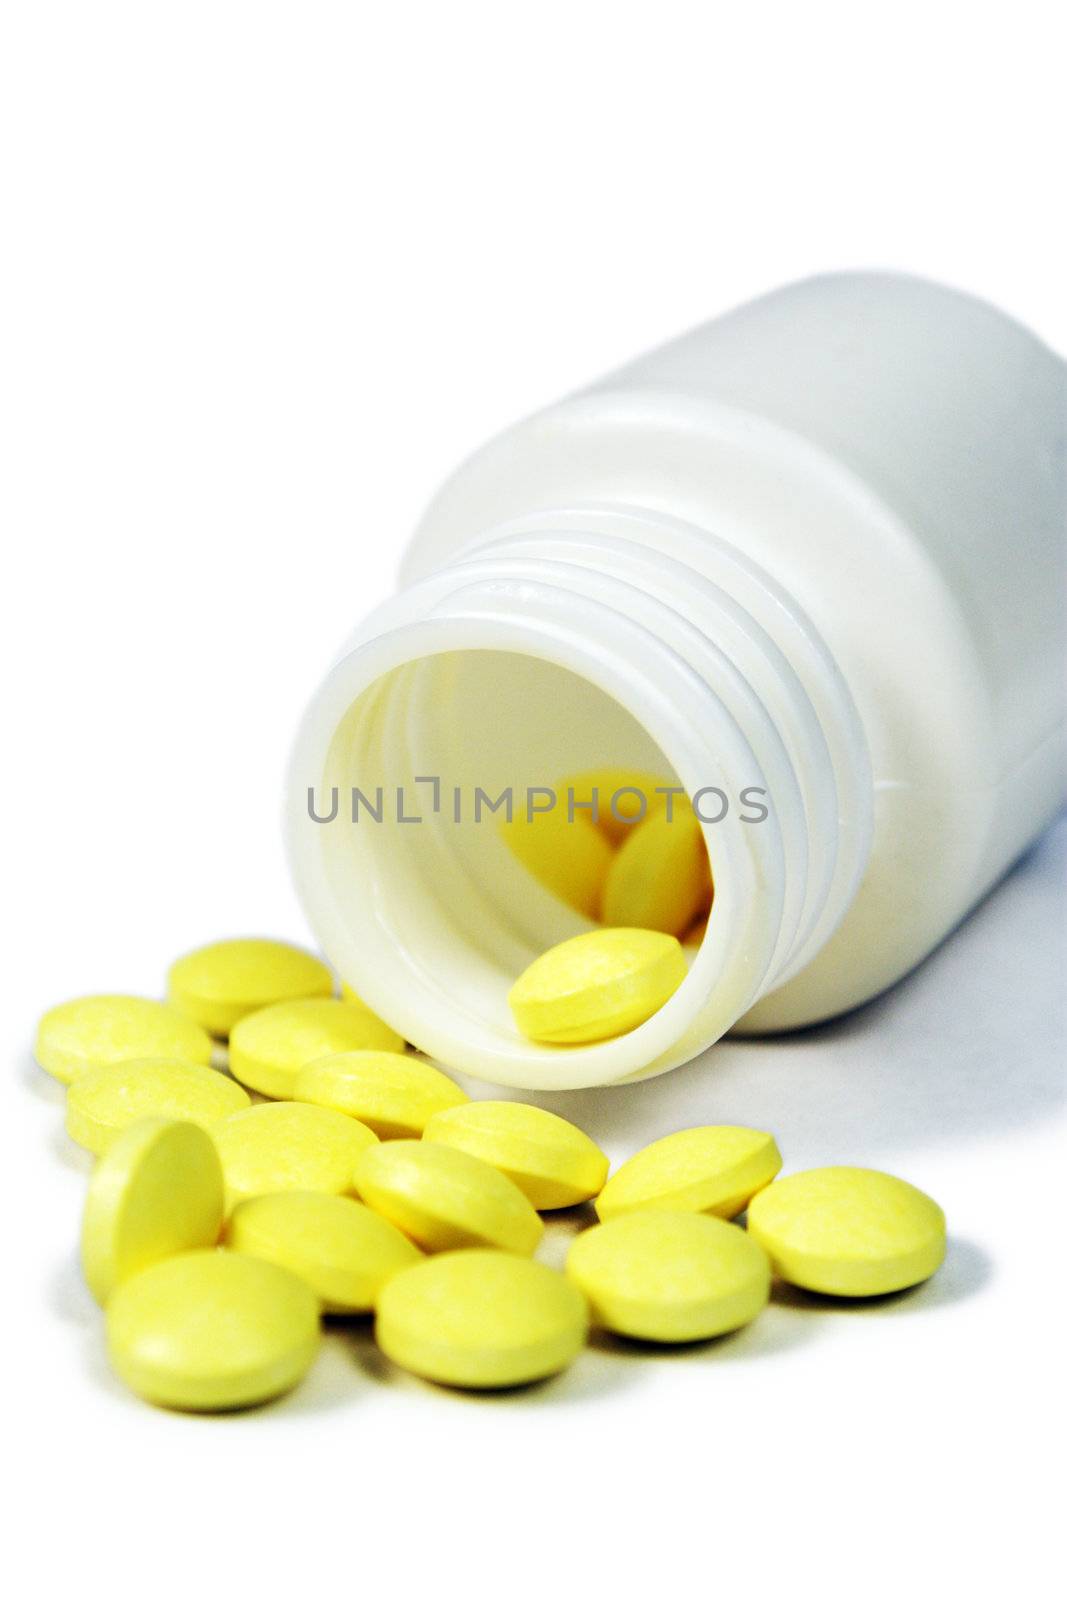 Overturned plastic jar of yellow pills on white background